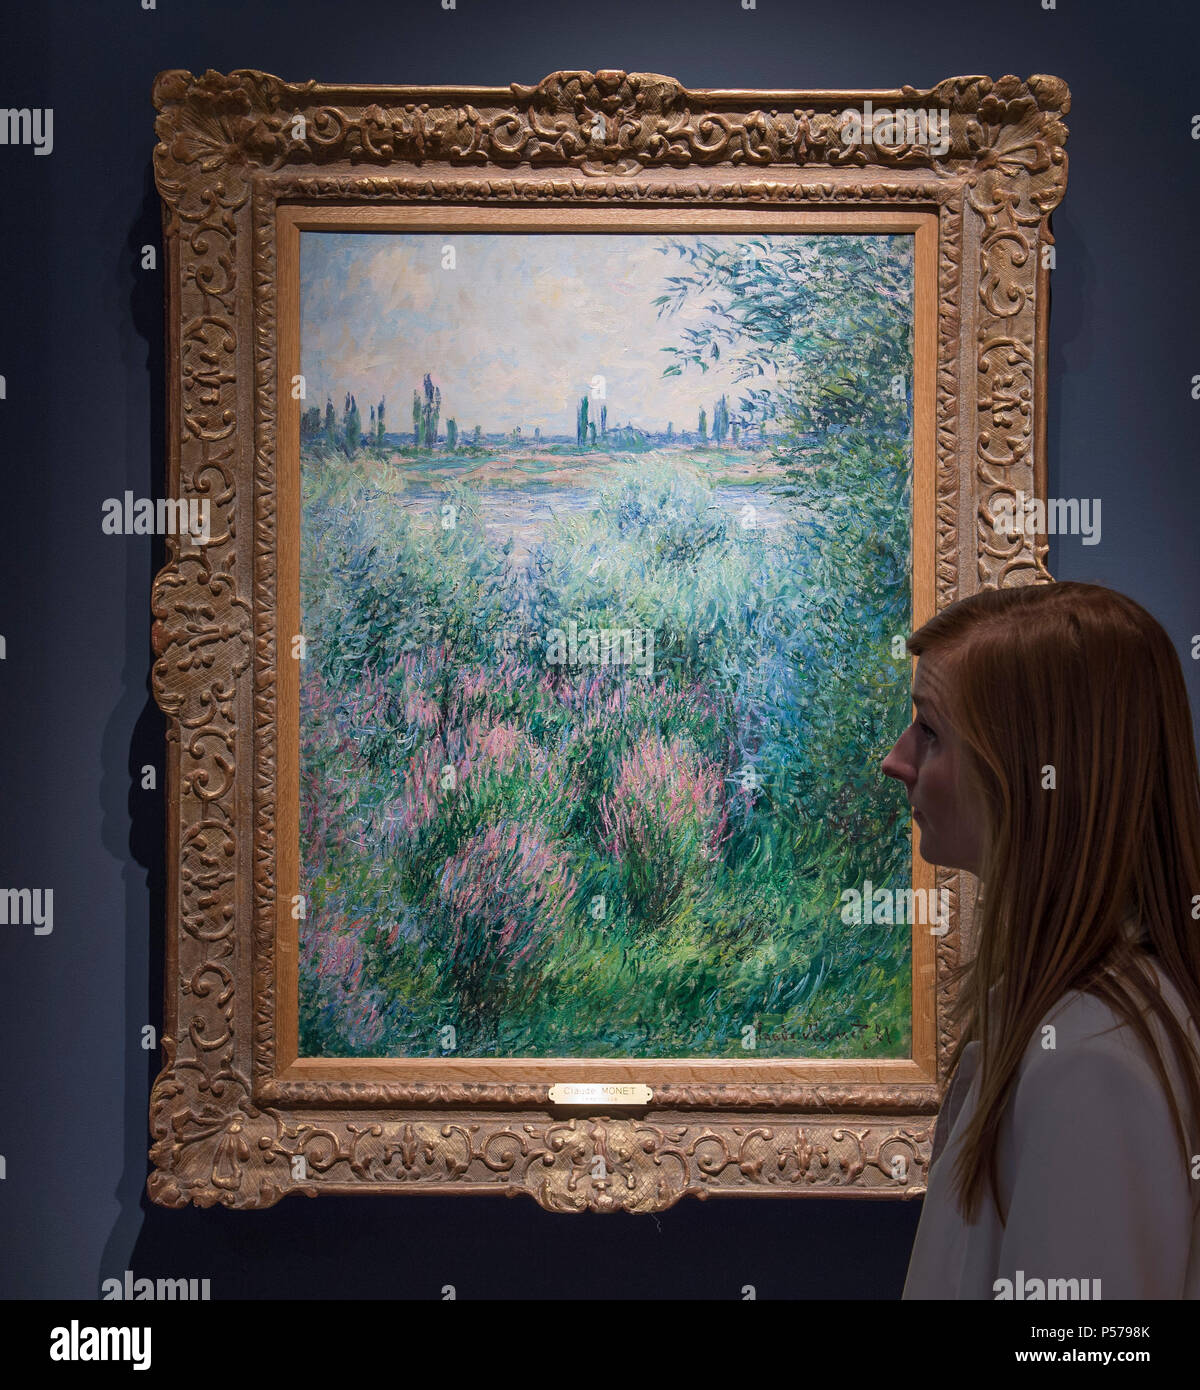 Masterpiece Art Fair, Royal Hospital Chelsea, London, UK. 25 June, 2018. Work is underway at Masterpiece London 2018 before the press opening on 27 June and public event 28 June - 4 July 2018. Fair Highlights in this major summer season event include Hammer Galleries with some extraordinary works by Monet, Renoir, Cassatt, Picasso, Chagall and Matisse. Photo: Bords de la Seine, un coin de berge, 1881. Claude Monet. Credit: Malcolm Park/Alamy Live News. Stock Photo